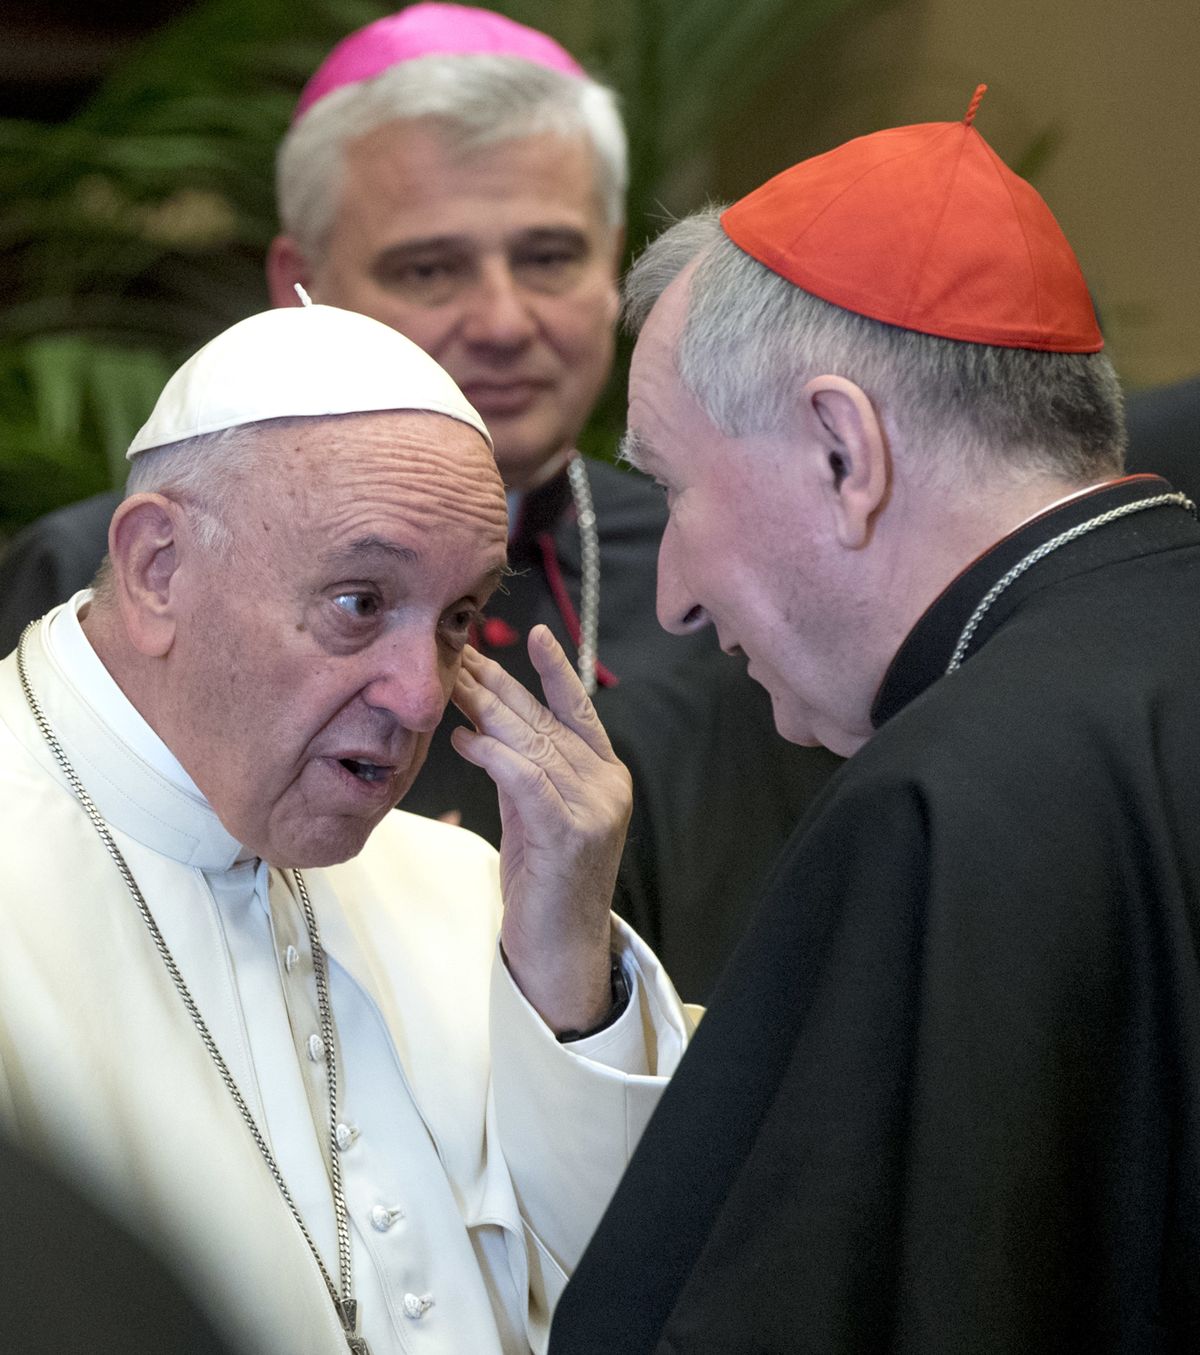 FILE - In this Dec. 21, 2017 file photo, Pope Francis talks to Vatican Secretary of State, Cardinal Pietro Parolin, on the occasion of his Christmas greetings to the Roman Curia in the Clementine Hall at the Vatican. Pope Francis summoned the secretary of state, Cardinal Pietro Parolin, his deputy as well as the Vatican’s top finance official, for a meeting Wednesday, Nov. 4, 2020, and gave the Vatican secretariat of state three months to transfer all its financial holdings to another Vatican office following its bungled management of hundreds of millions of euros in donations and other assets that are now the subject of a corruption investigation.  (Claudio Peri)